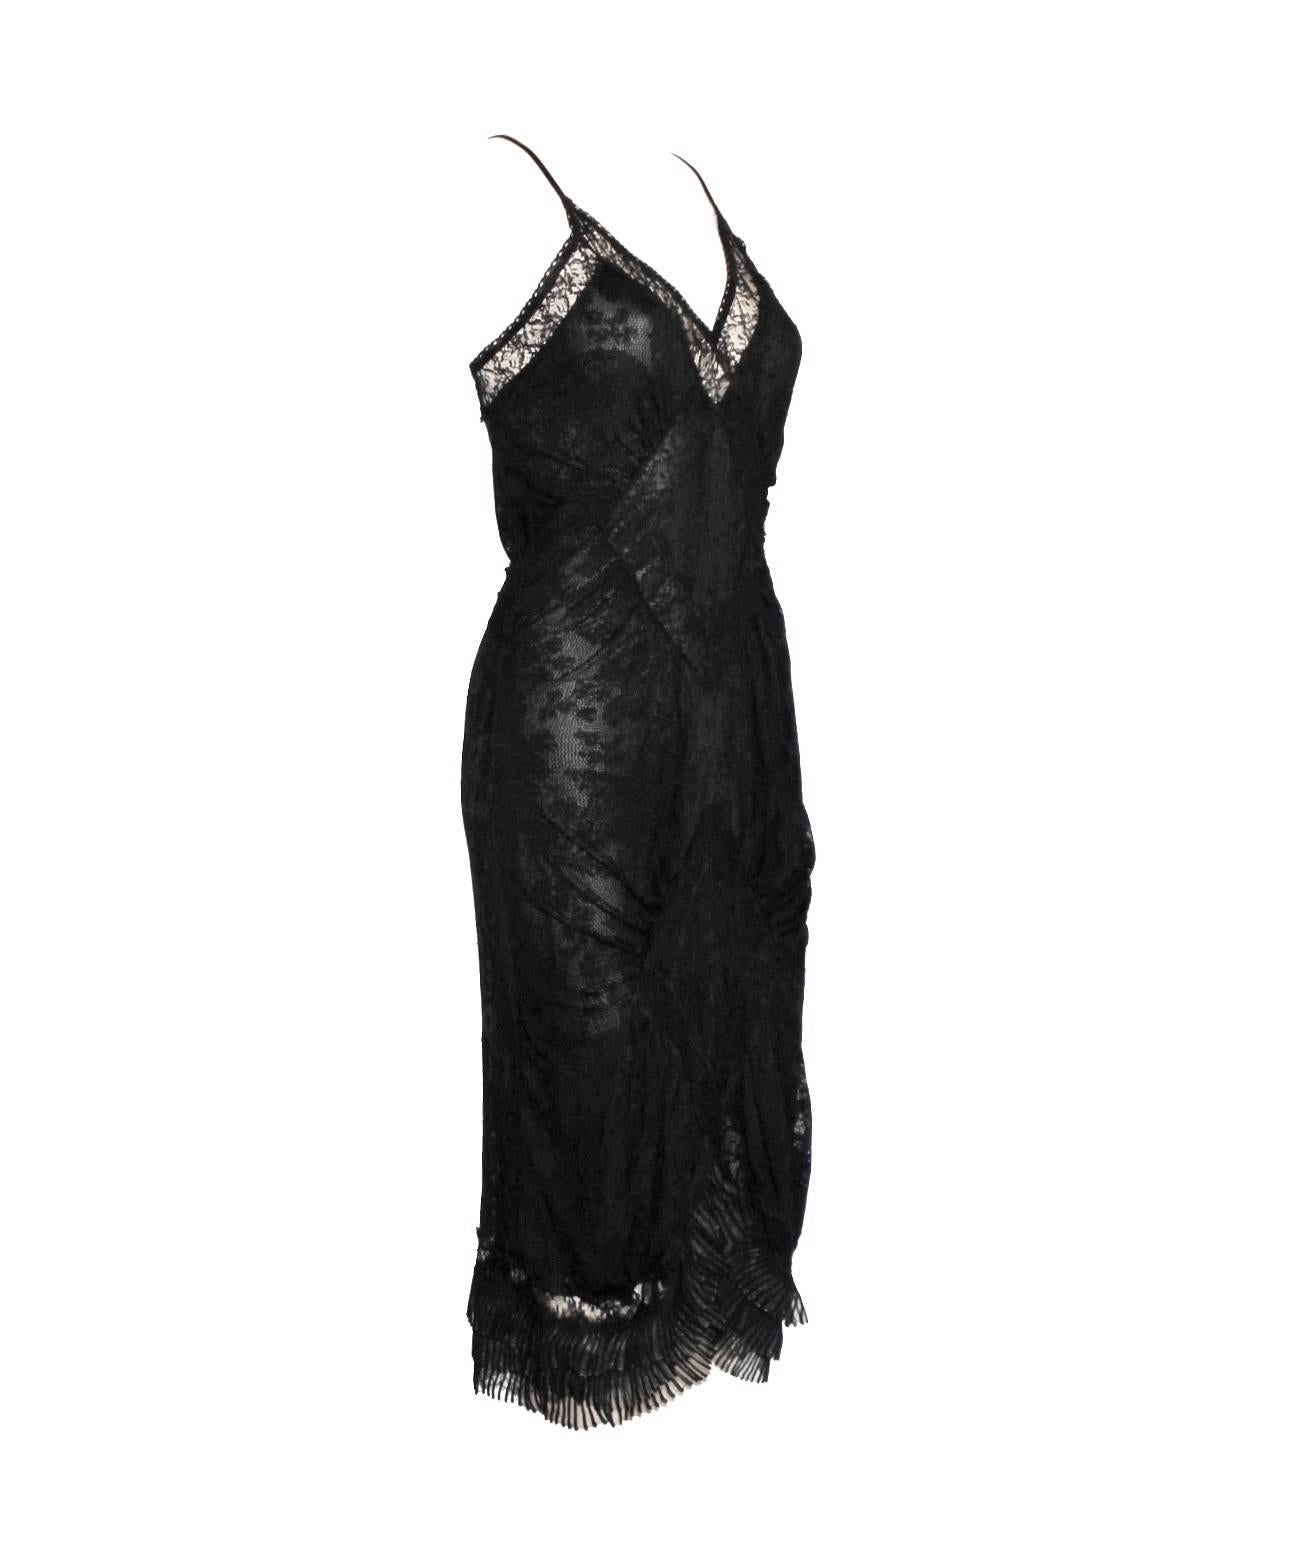 GORGEOUS 

CHRISTIAN DIOR 

BLACK KNIT & LACE COCKTAIL DRESS

A TRUE ICON!

DETAILS: 
An extremely luxurious and versatile CHRISTIAN DIOR classic signature piece that will last you for years
Draped details
Dry clean only
Made in France
Fully